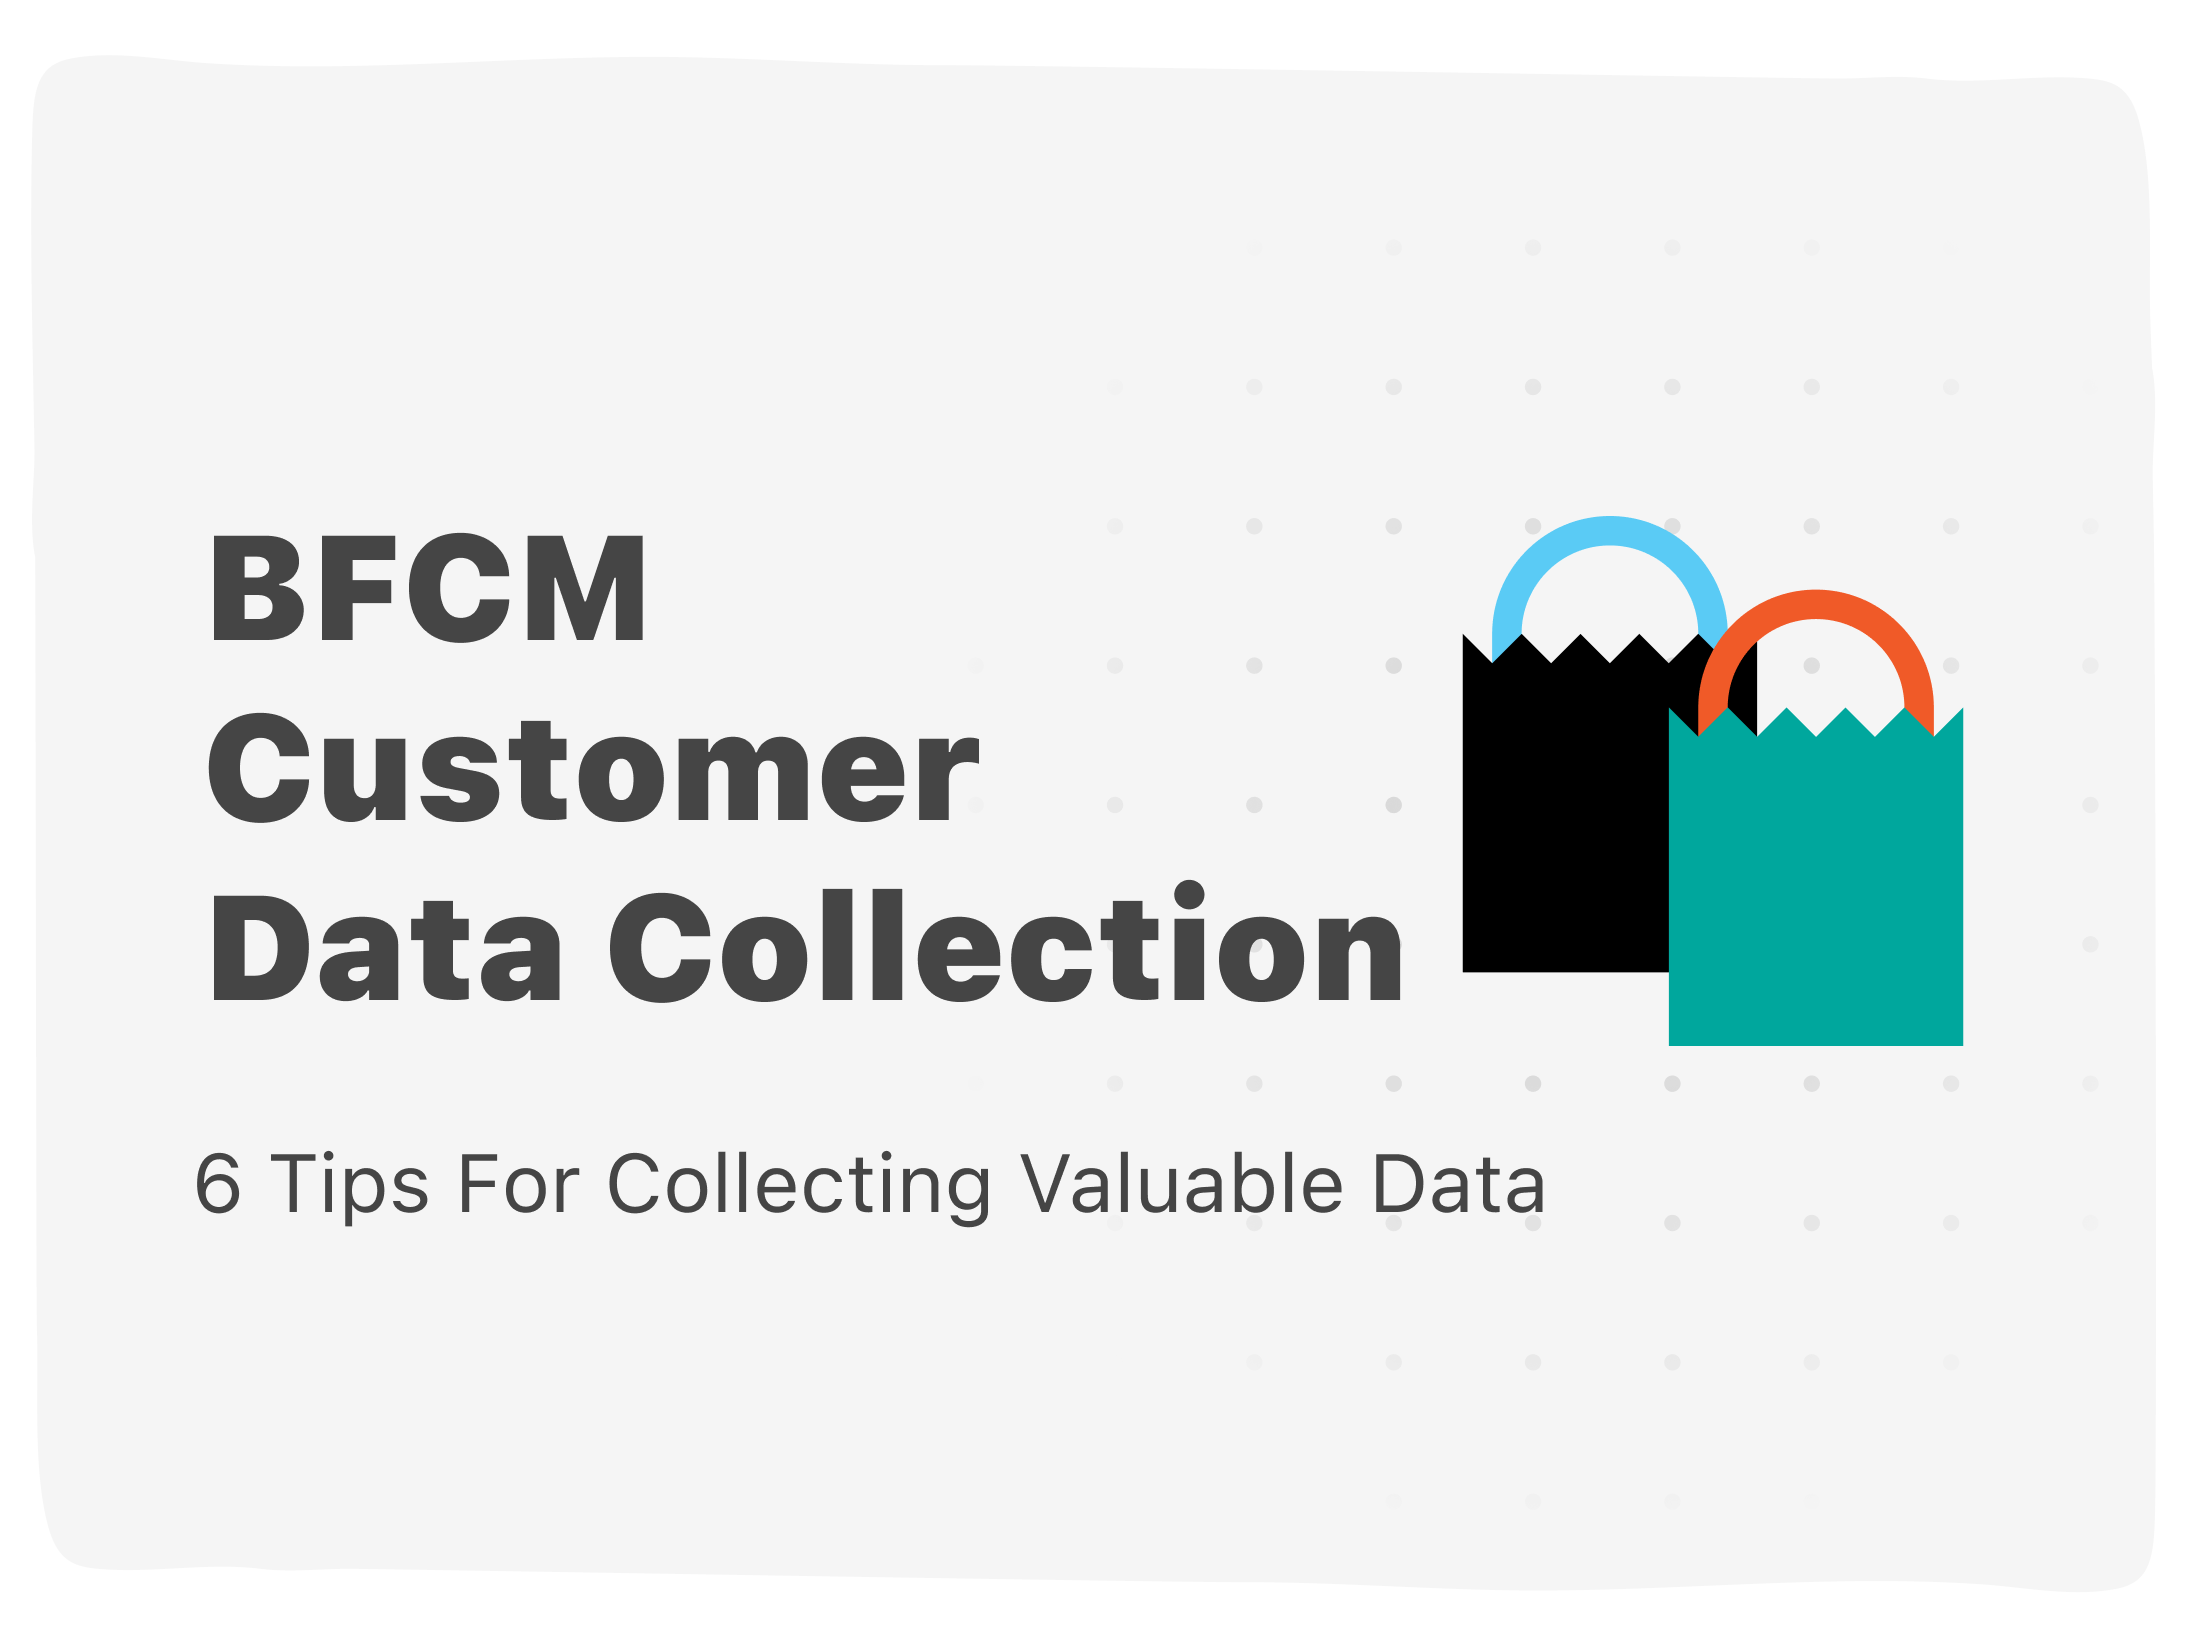 6 Tips For Collecting Valuable Customer Data This BFCM